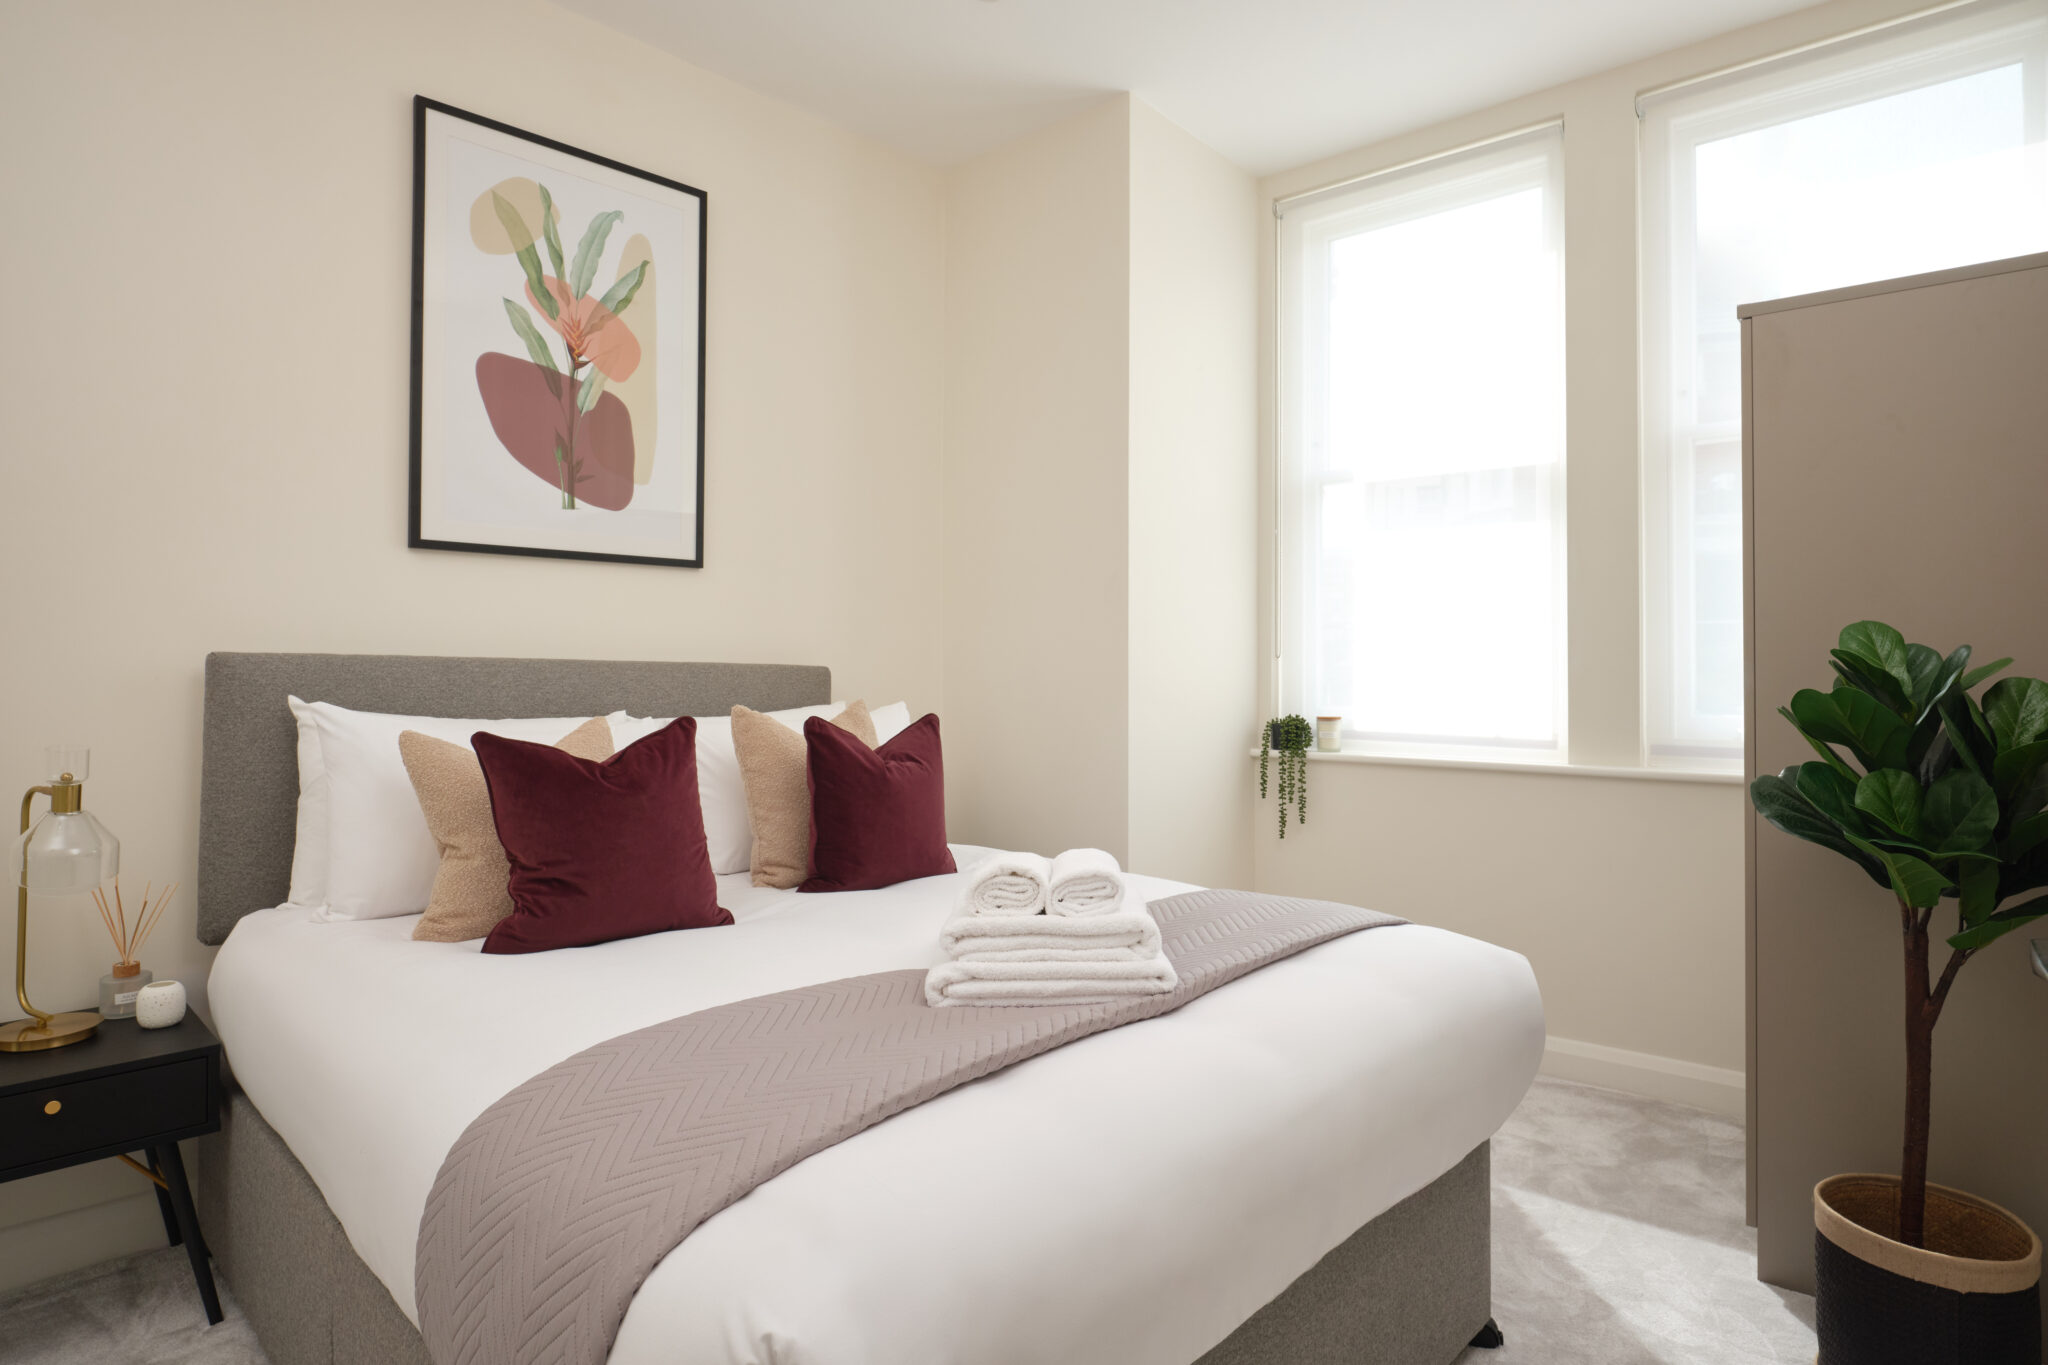 Glenthorne Rd Apartments - West London Serviced Apartments - London | Urban Stay